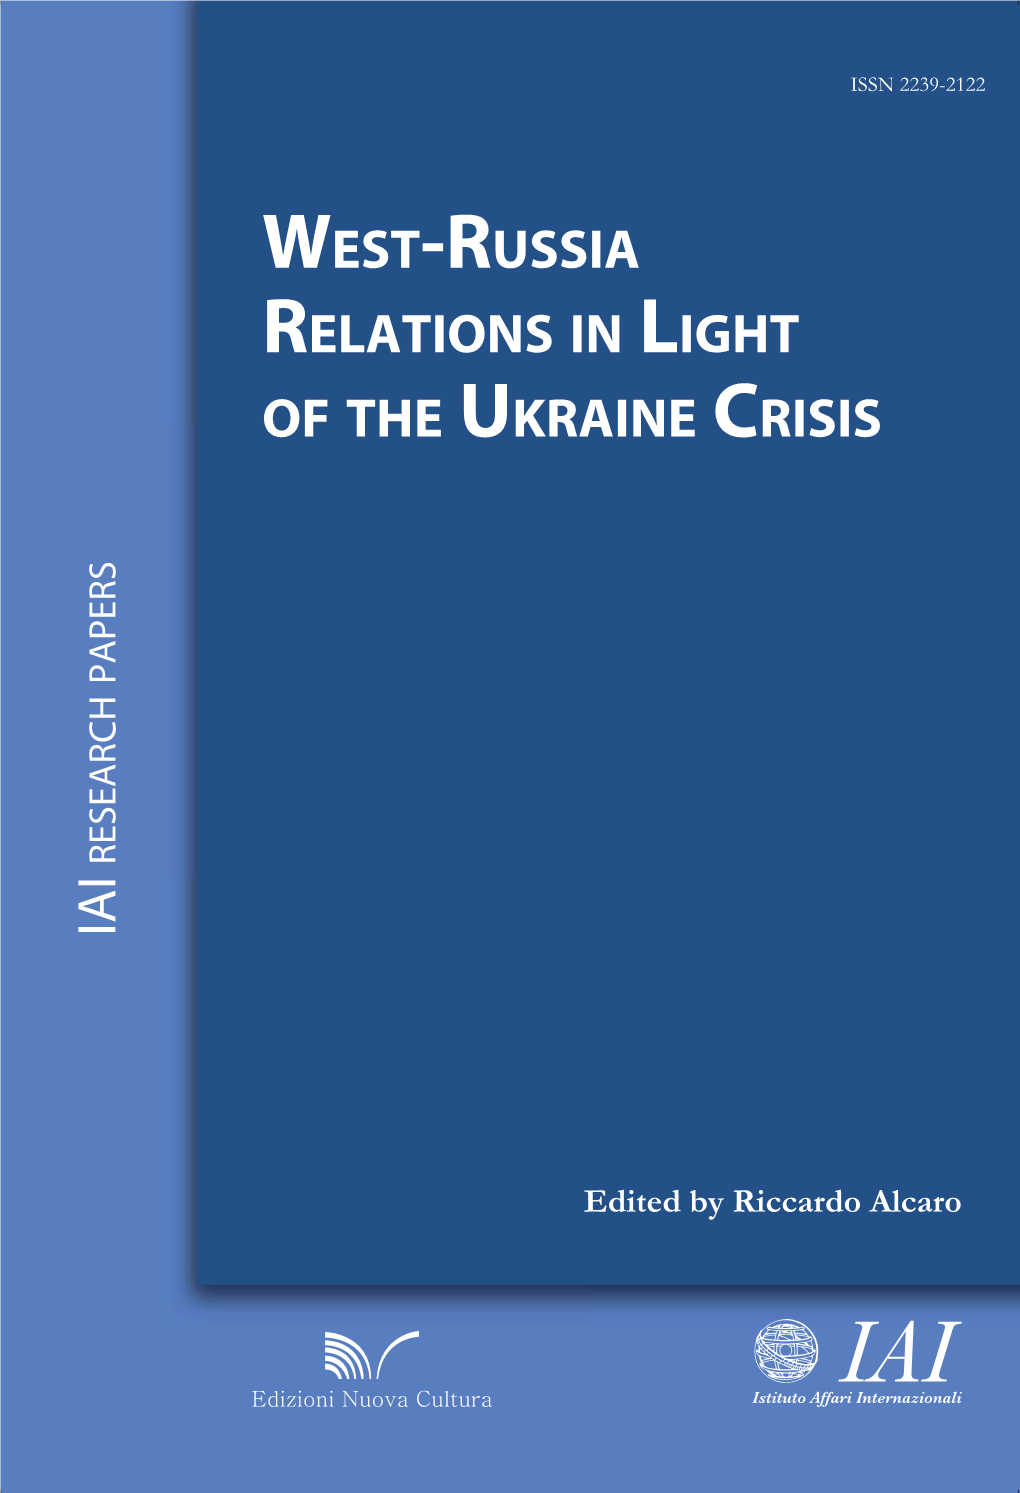 West-Russia Relations in Light of the Ukraine Crisis